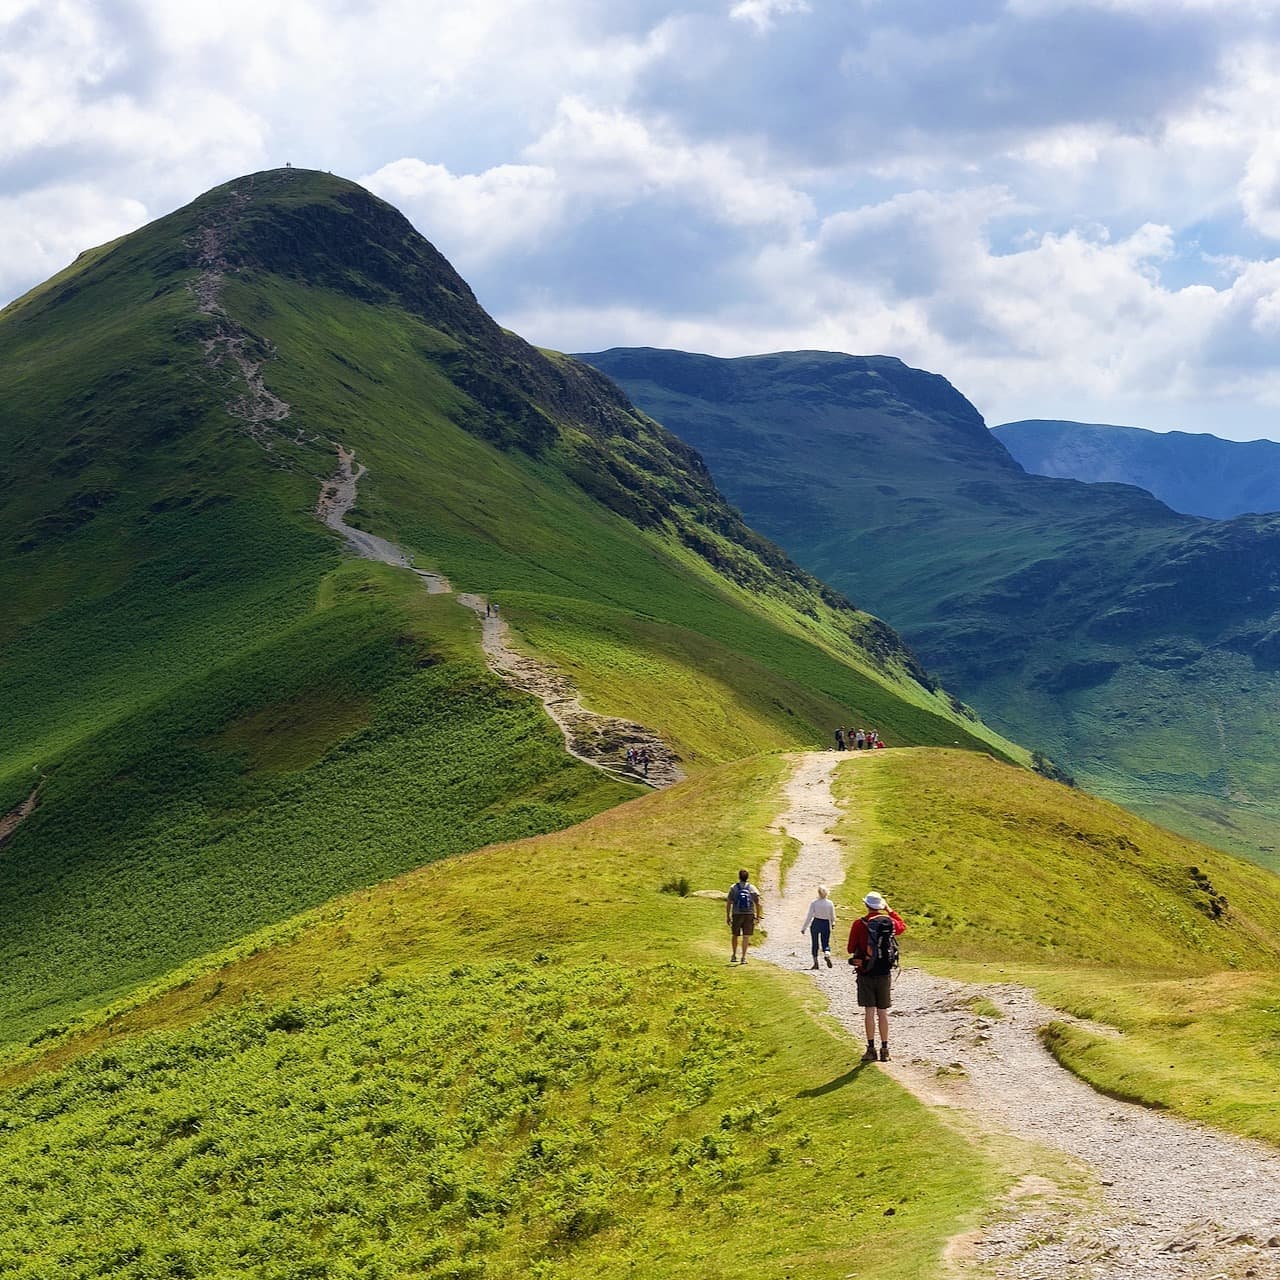 "Catbells Northern Ascent, Lake District" by David Iliff, licensed CC BY-SA 3.0